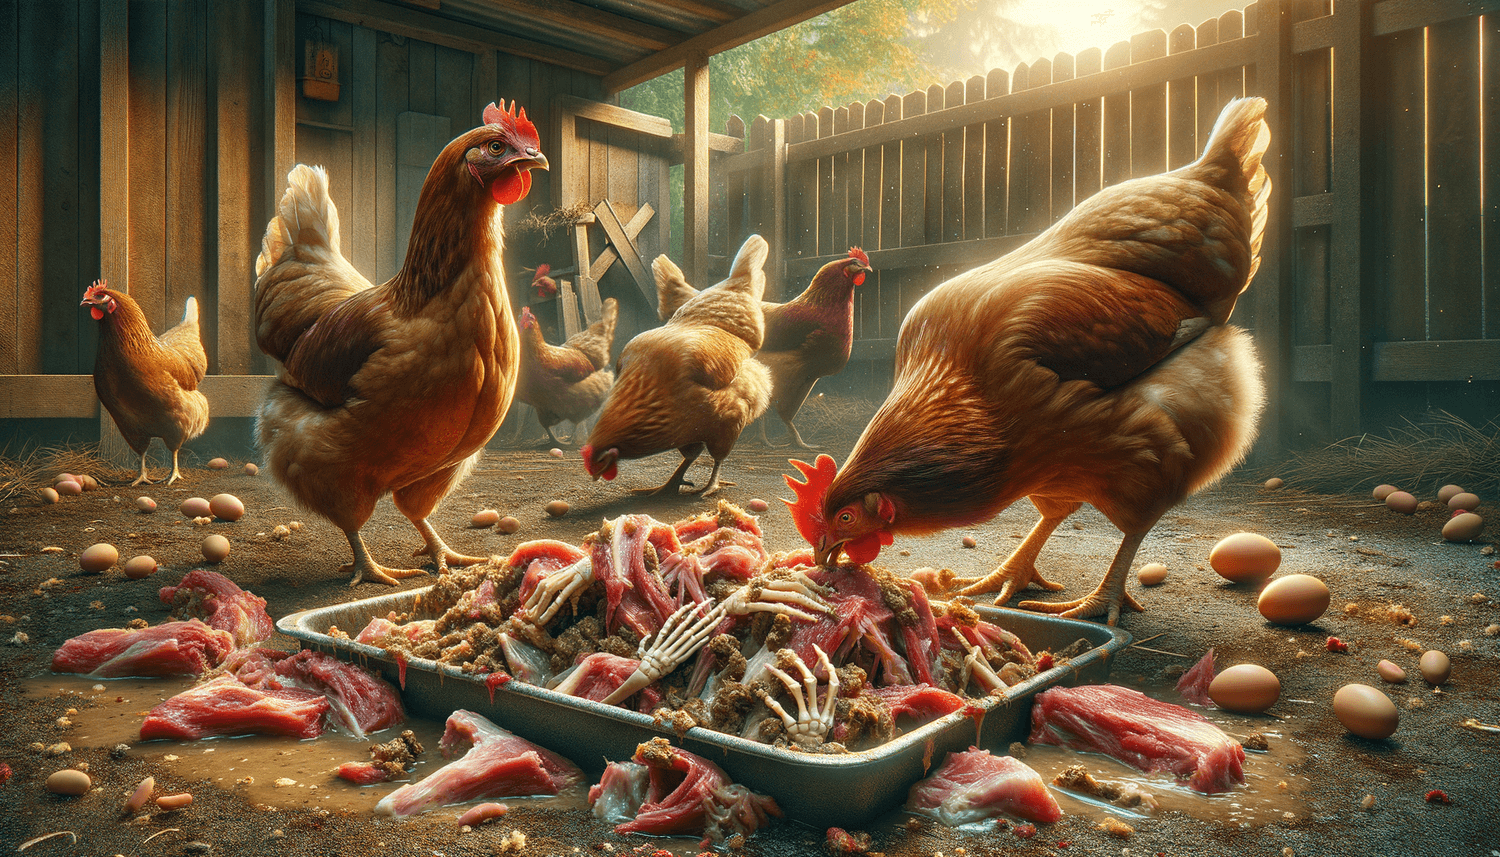 Can Chickens Eat Spoiled Meat?